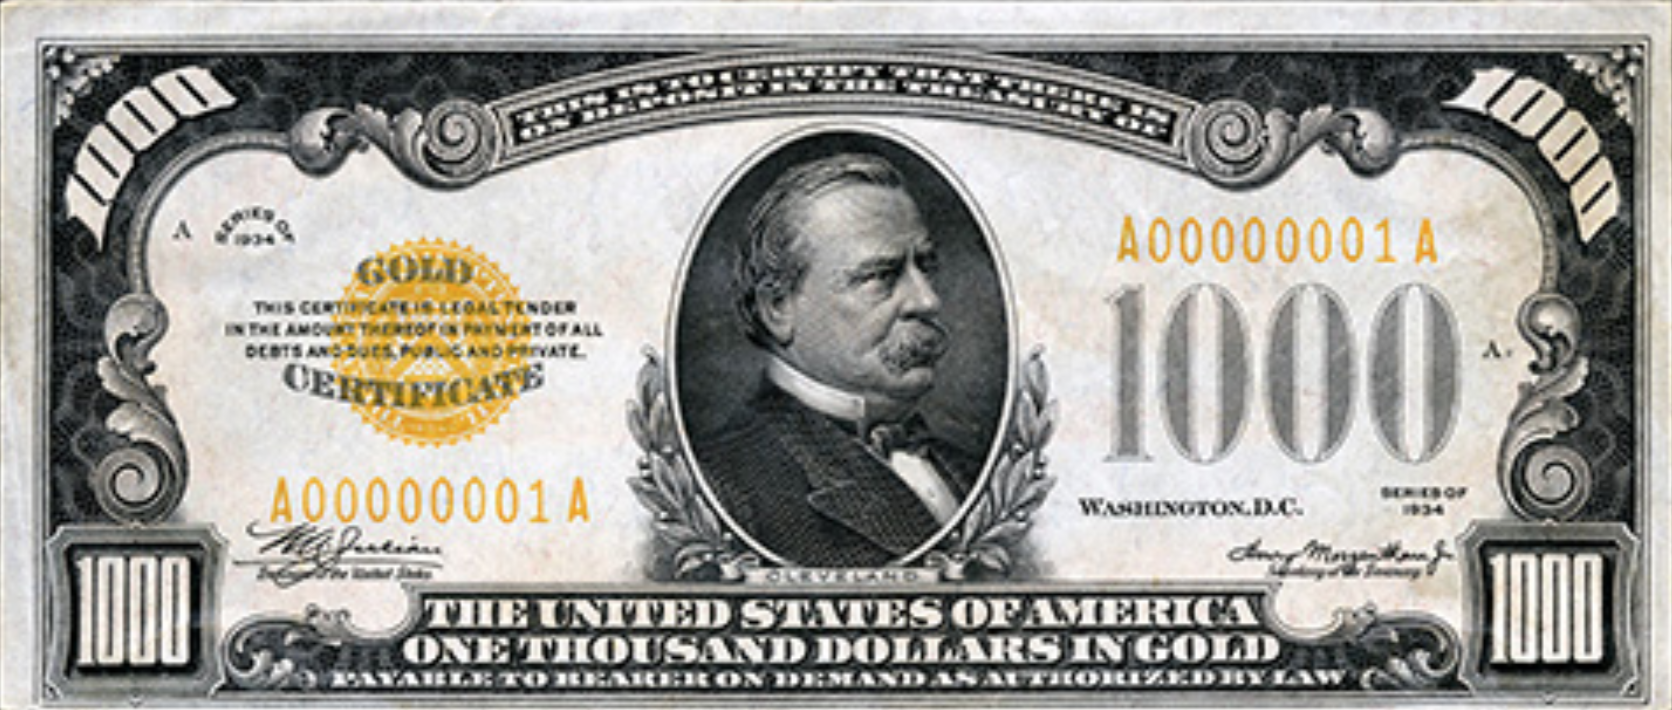 What's a thousand dollar bill worth? - CoinSite